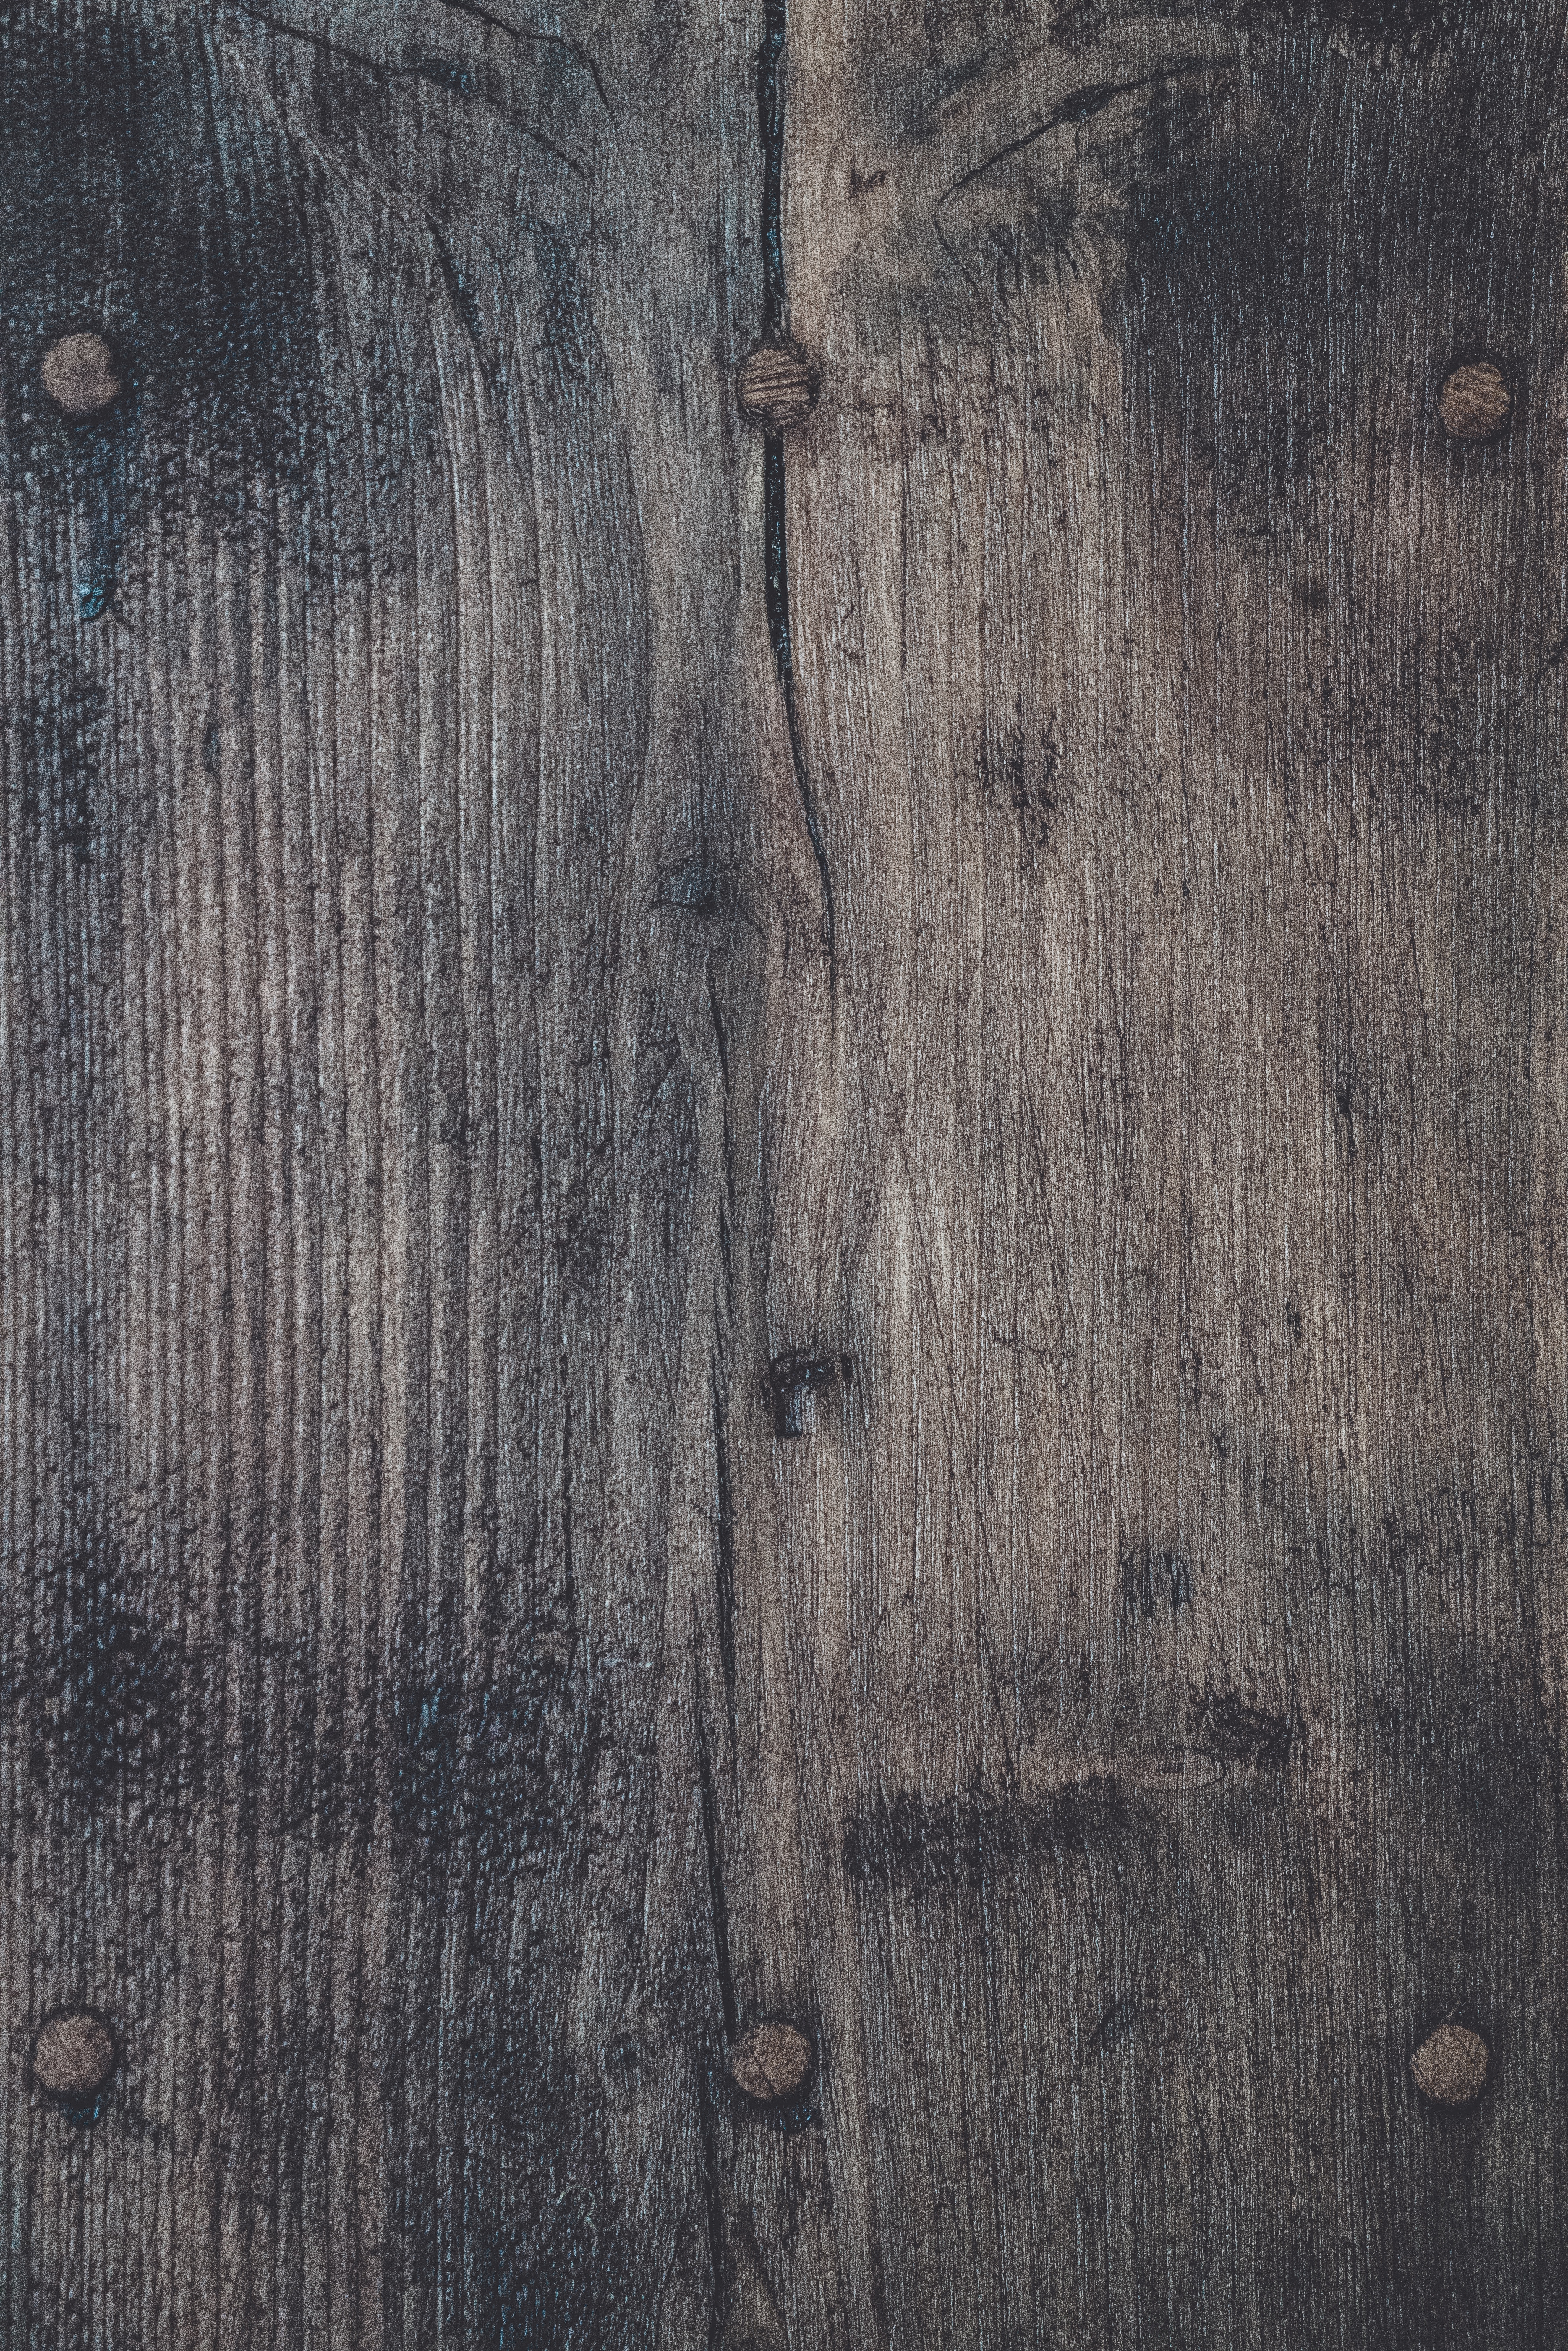 wallpapers texture, ribbed, textures, surface, wood, wooden